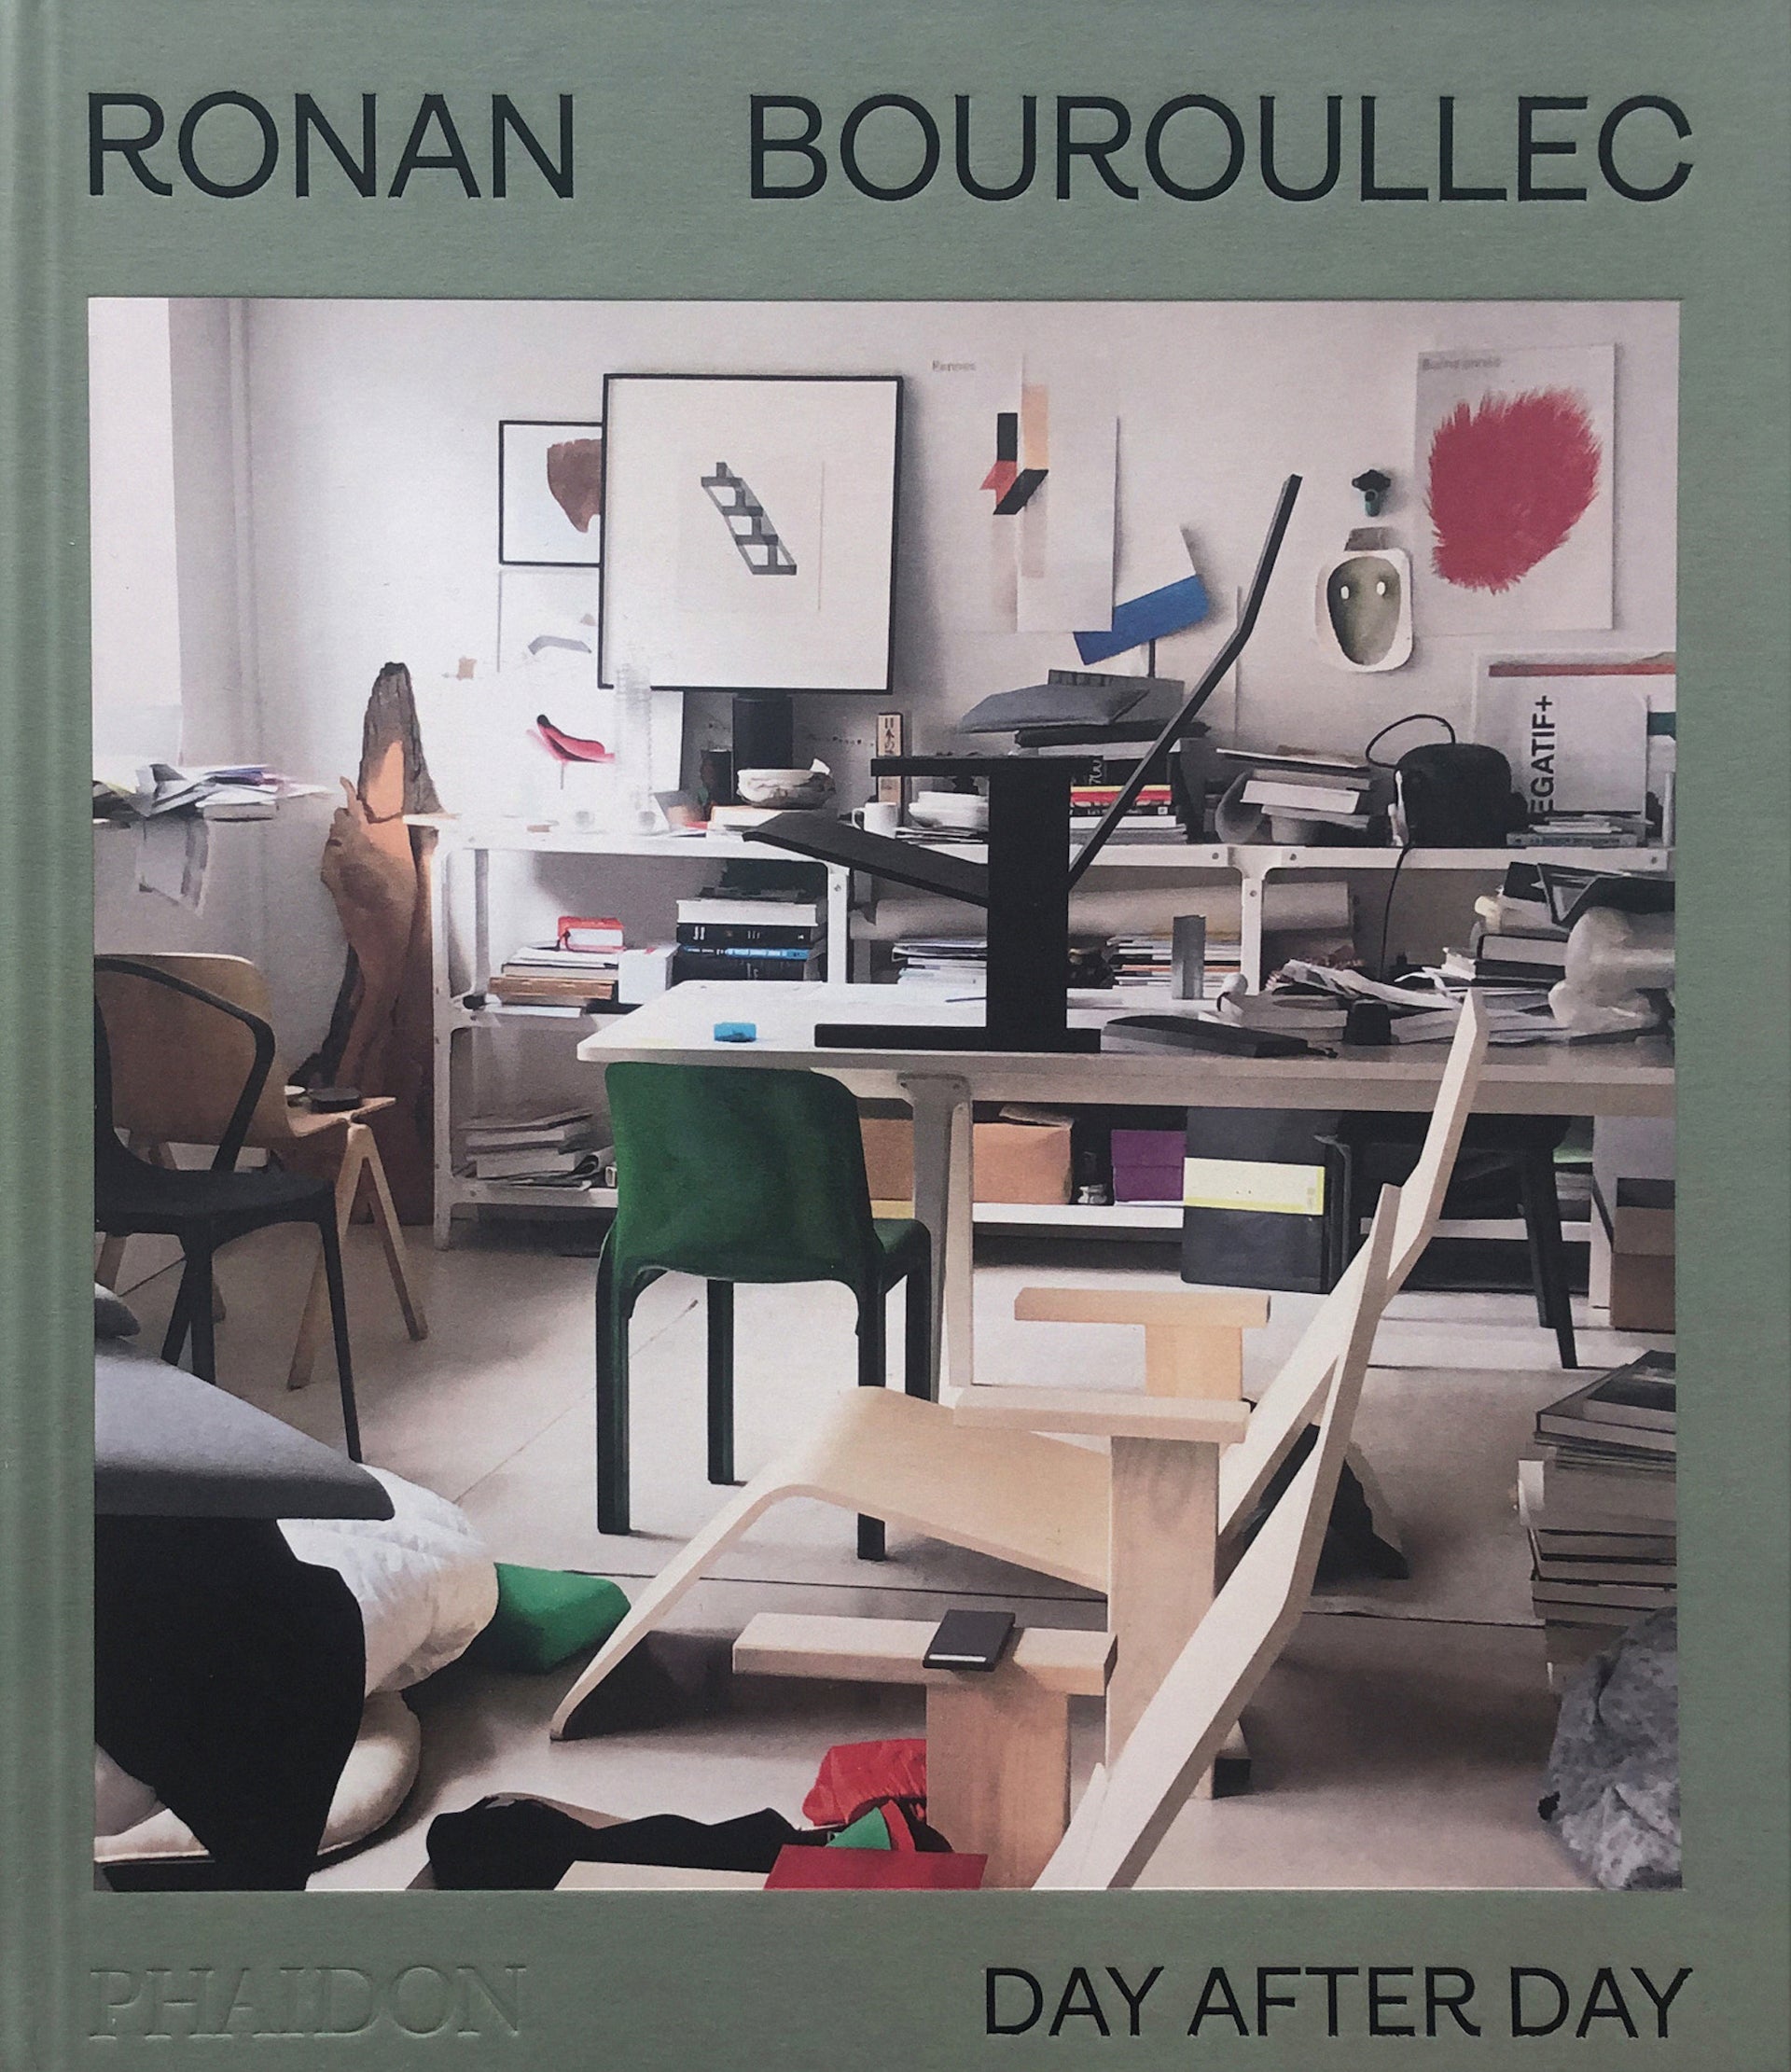 Cover of the forthcoming monograph Ronan Bouroullec: Day After Day. Photo © Phaidon